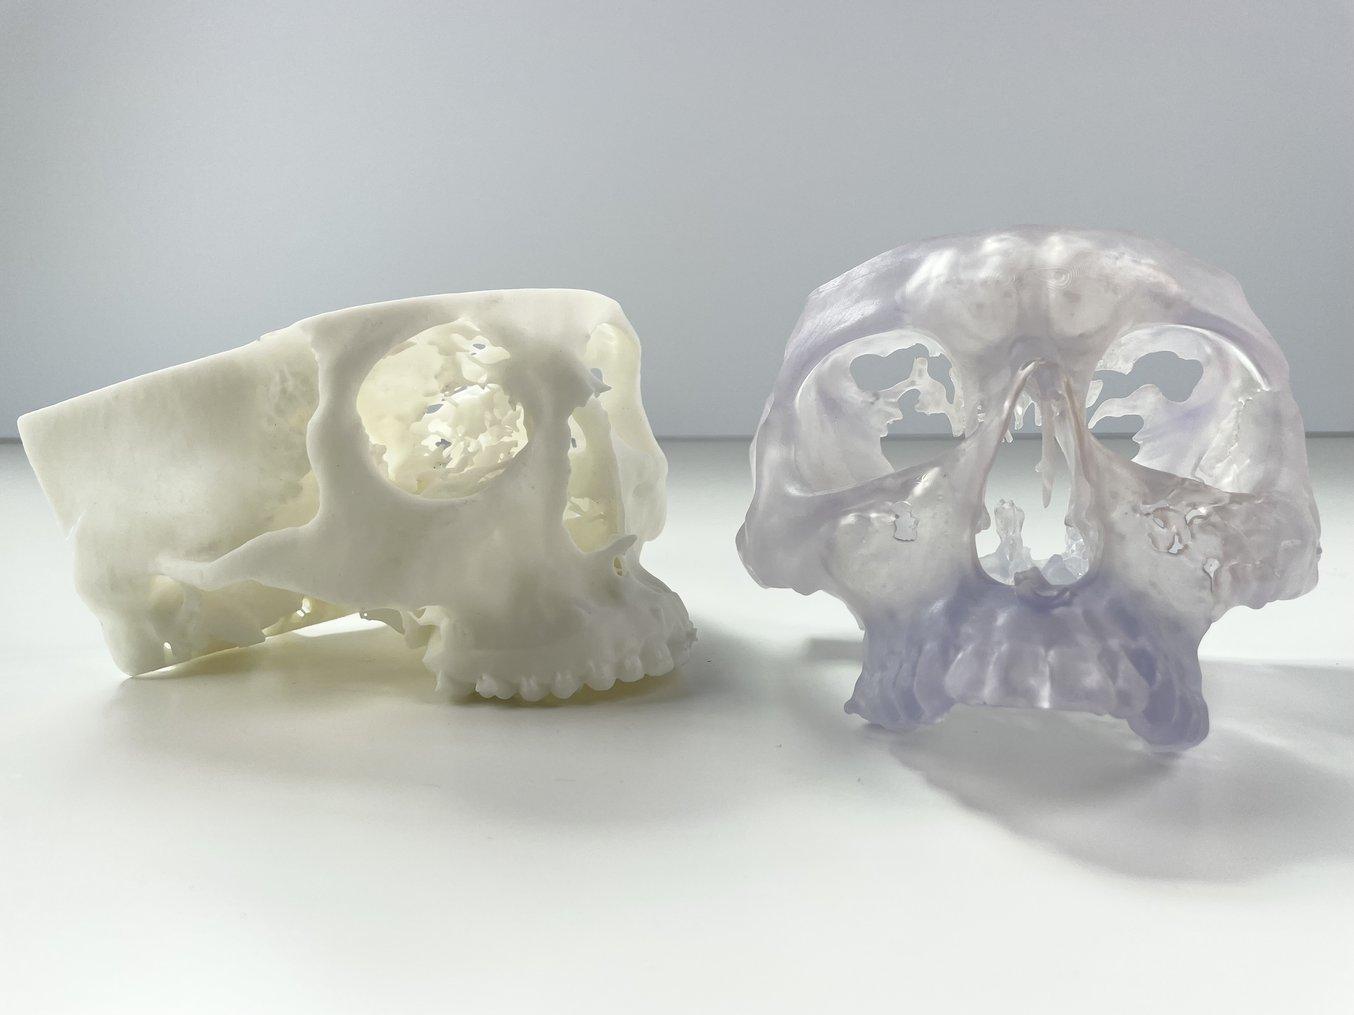 Two 3D printed anatomical models of the upper jaw and eye sockets, printed in white and clear resin. One is a side view, the other front view